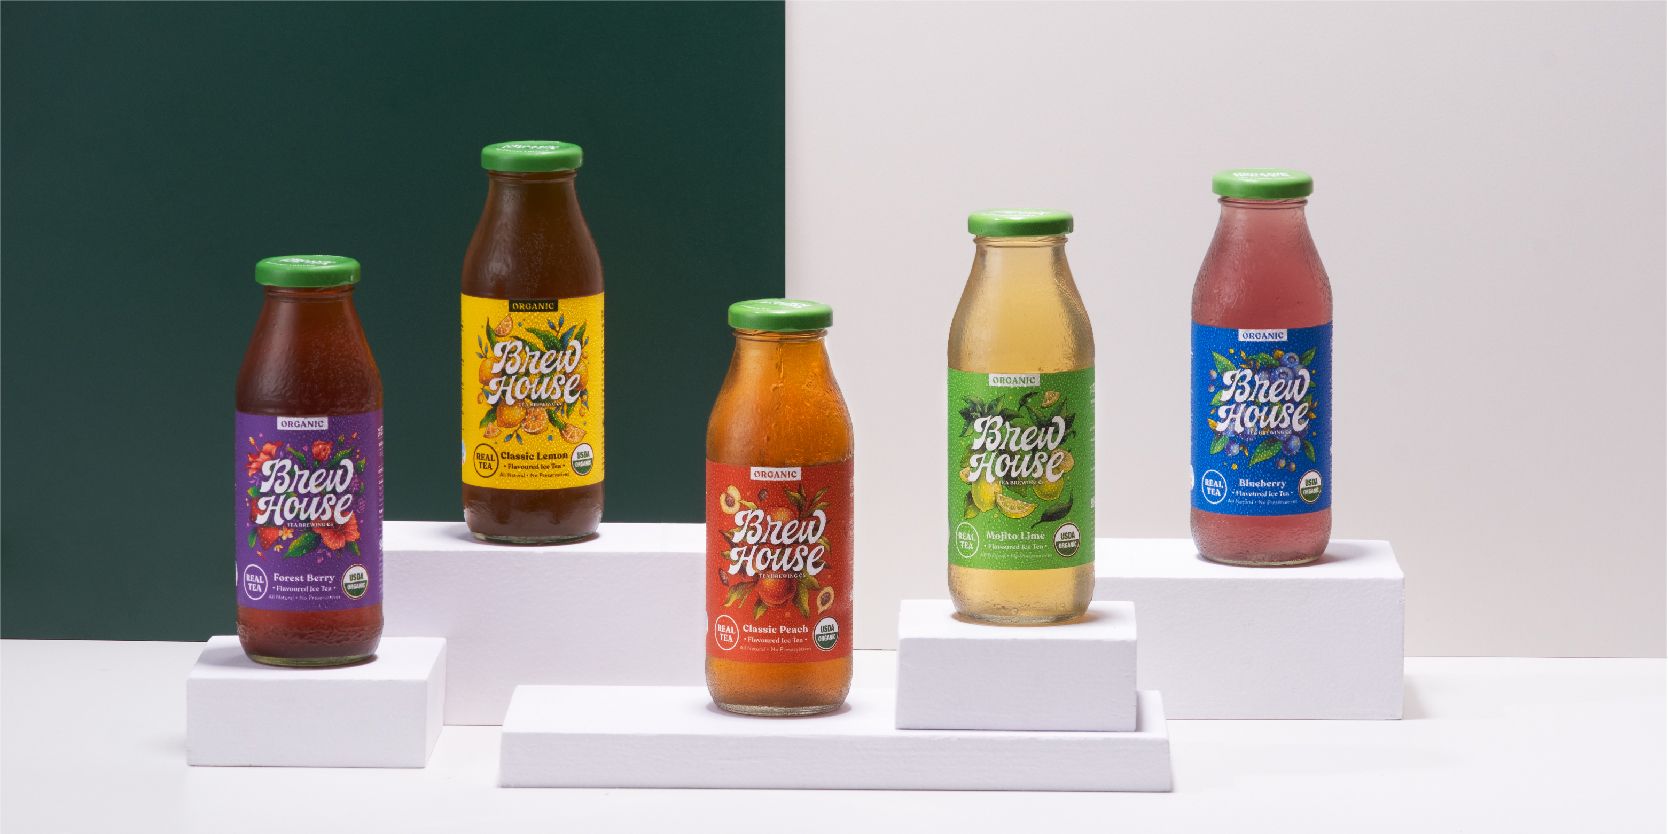 This Company provides organic, naturally brewed beverages
